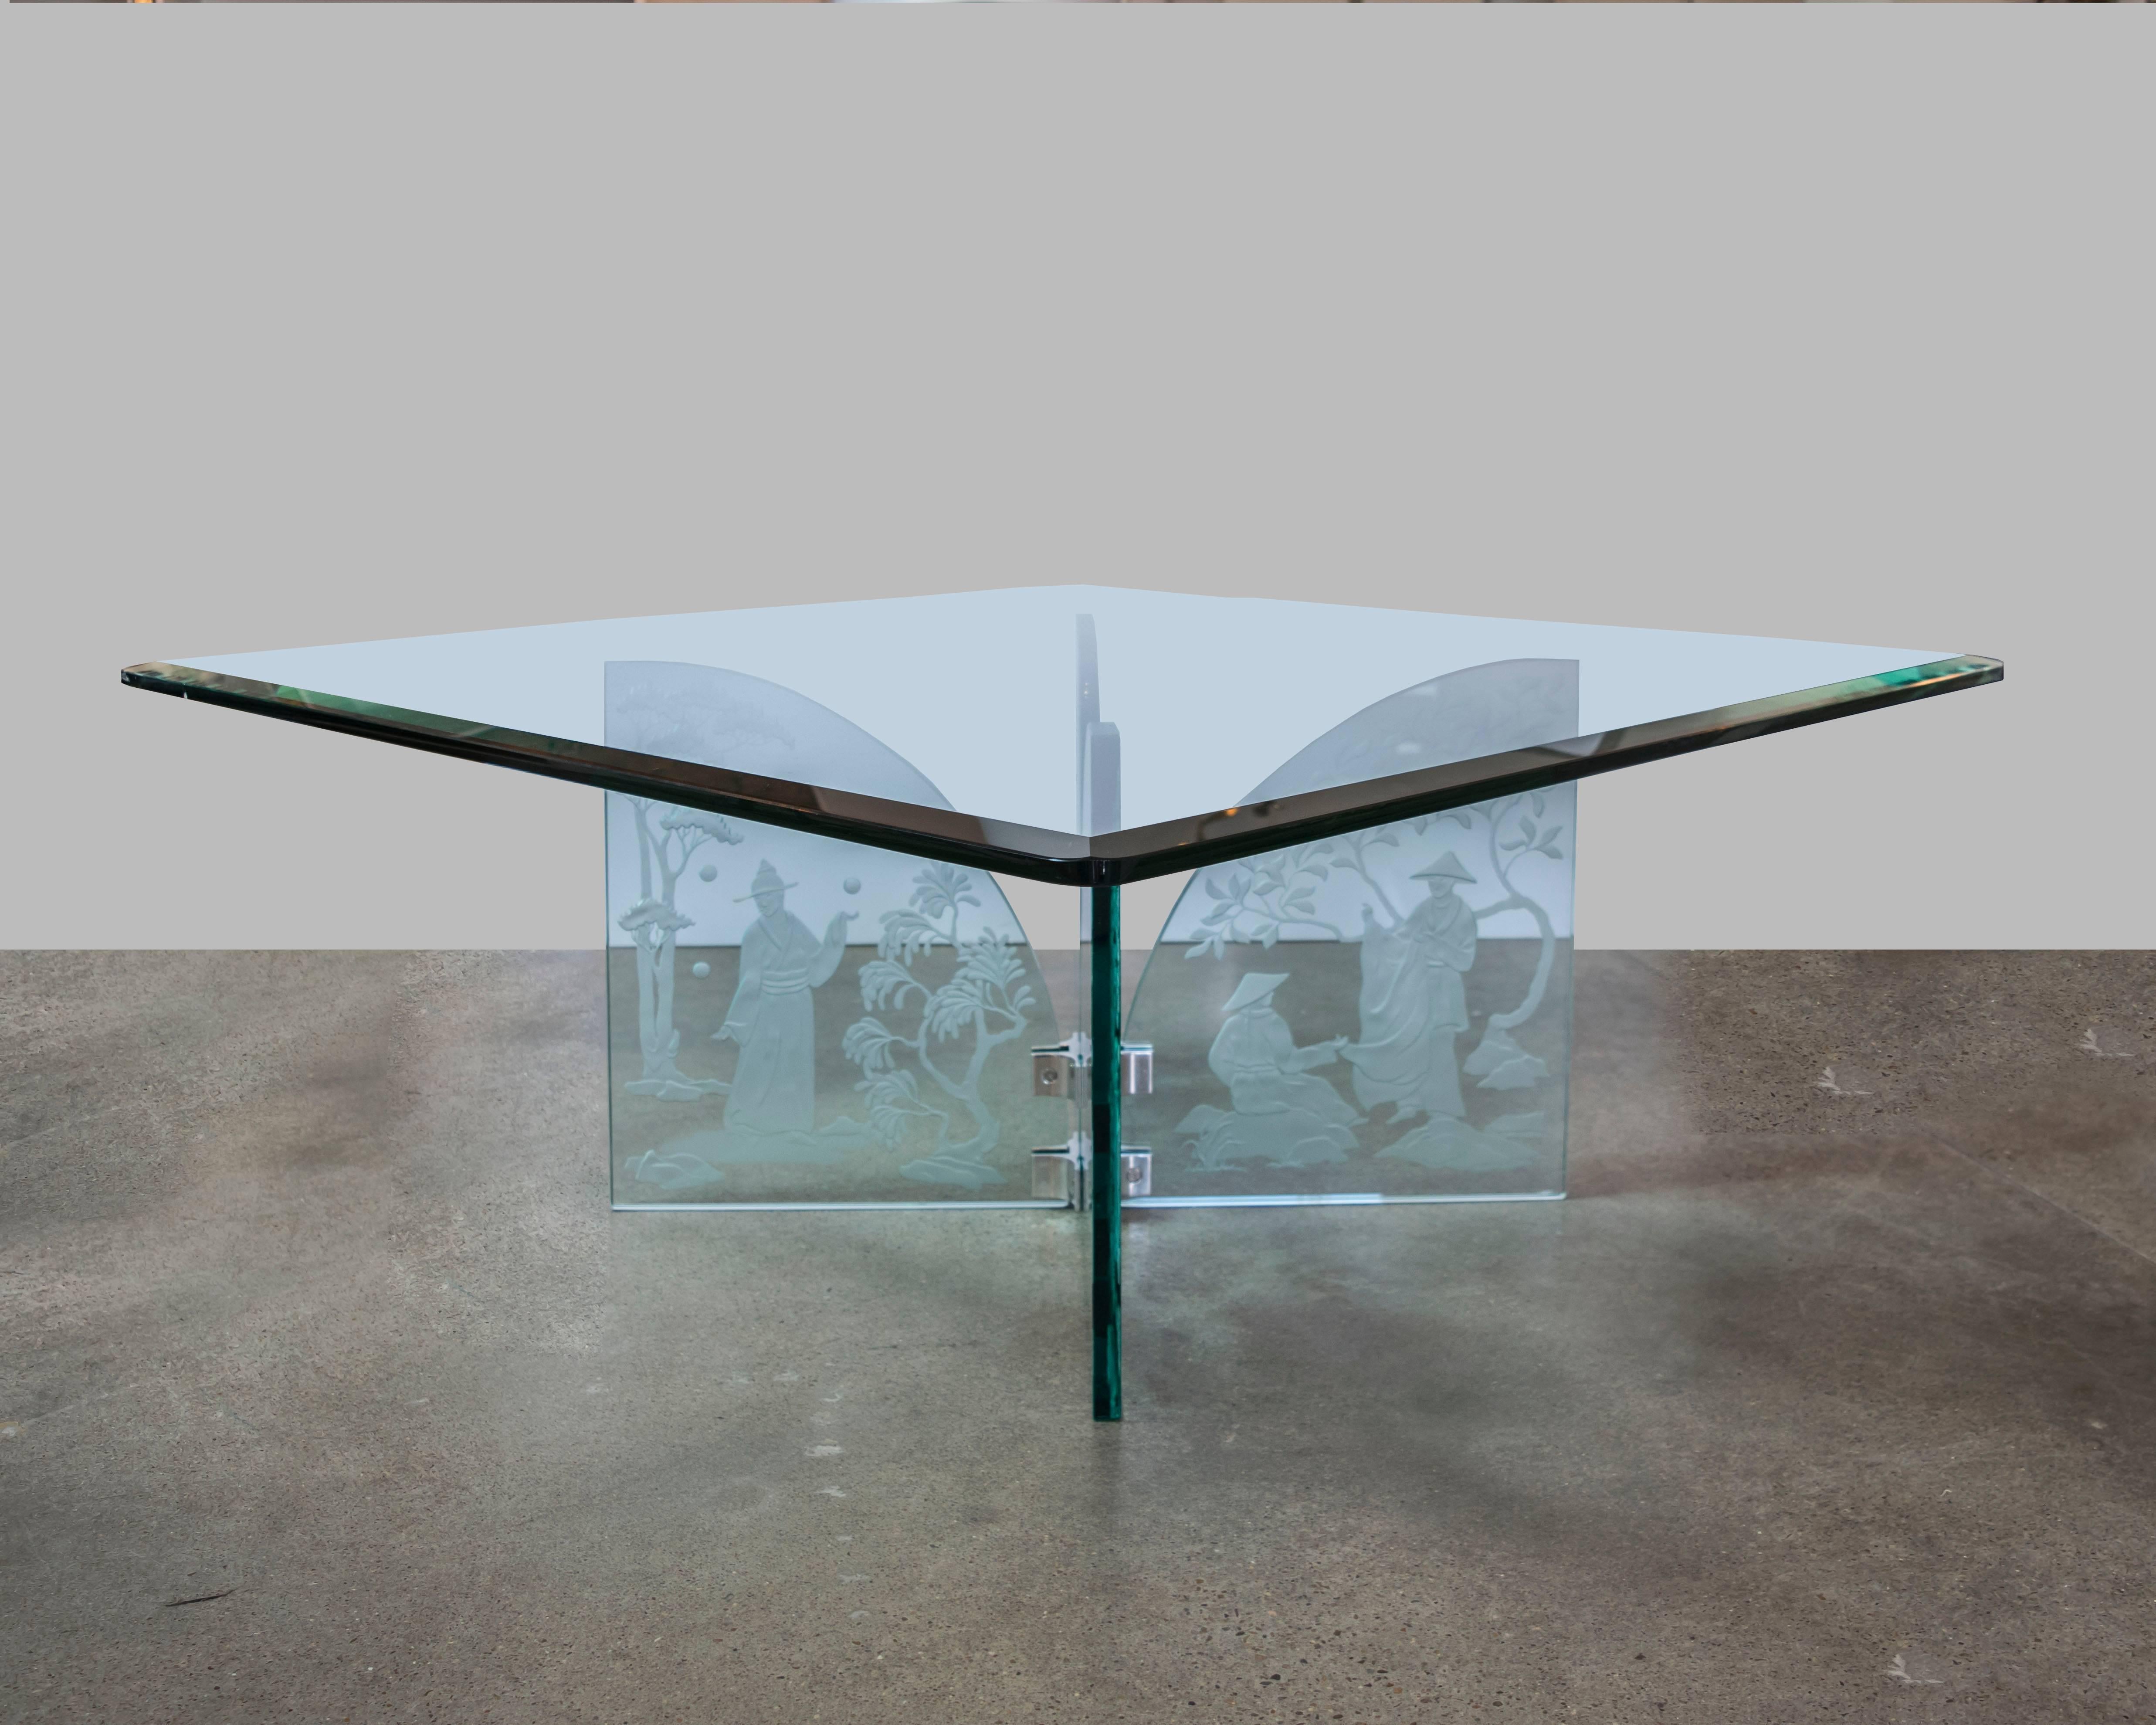 This exquisitely crafted four-panel glass coffee table came from a fabulous estate filled with original Karl Springer furniture. We were informed that the table was purchased from the Karl Springer showroom and the four-panel base was hand etched by